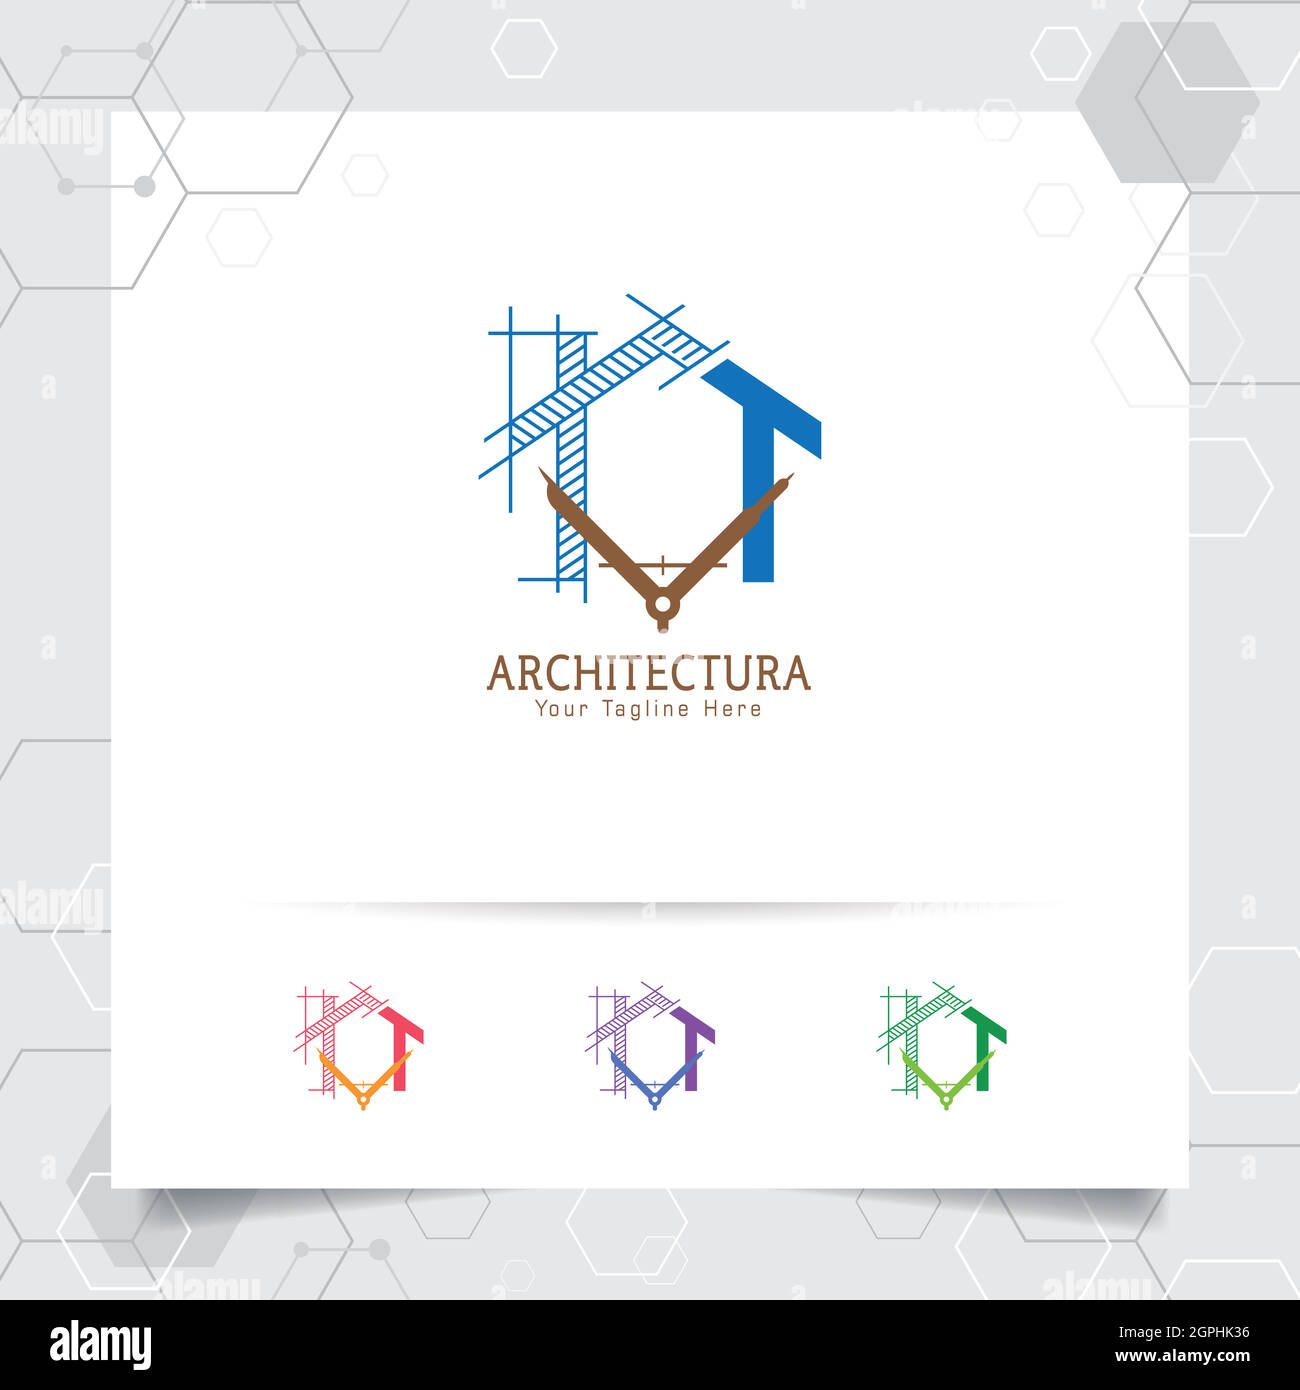 Architect construction logo design concept of architectural sketch of the house. Property logo icon for contractor and real estate. Stock Vector